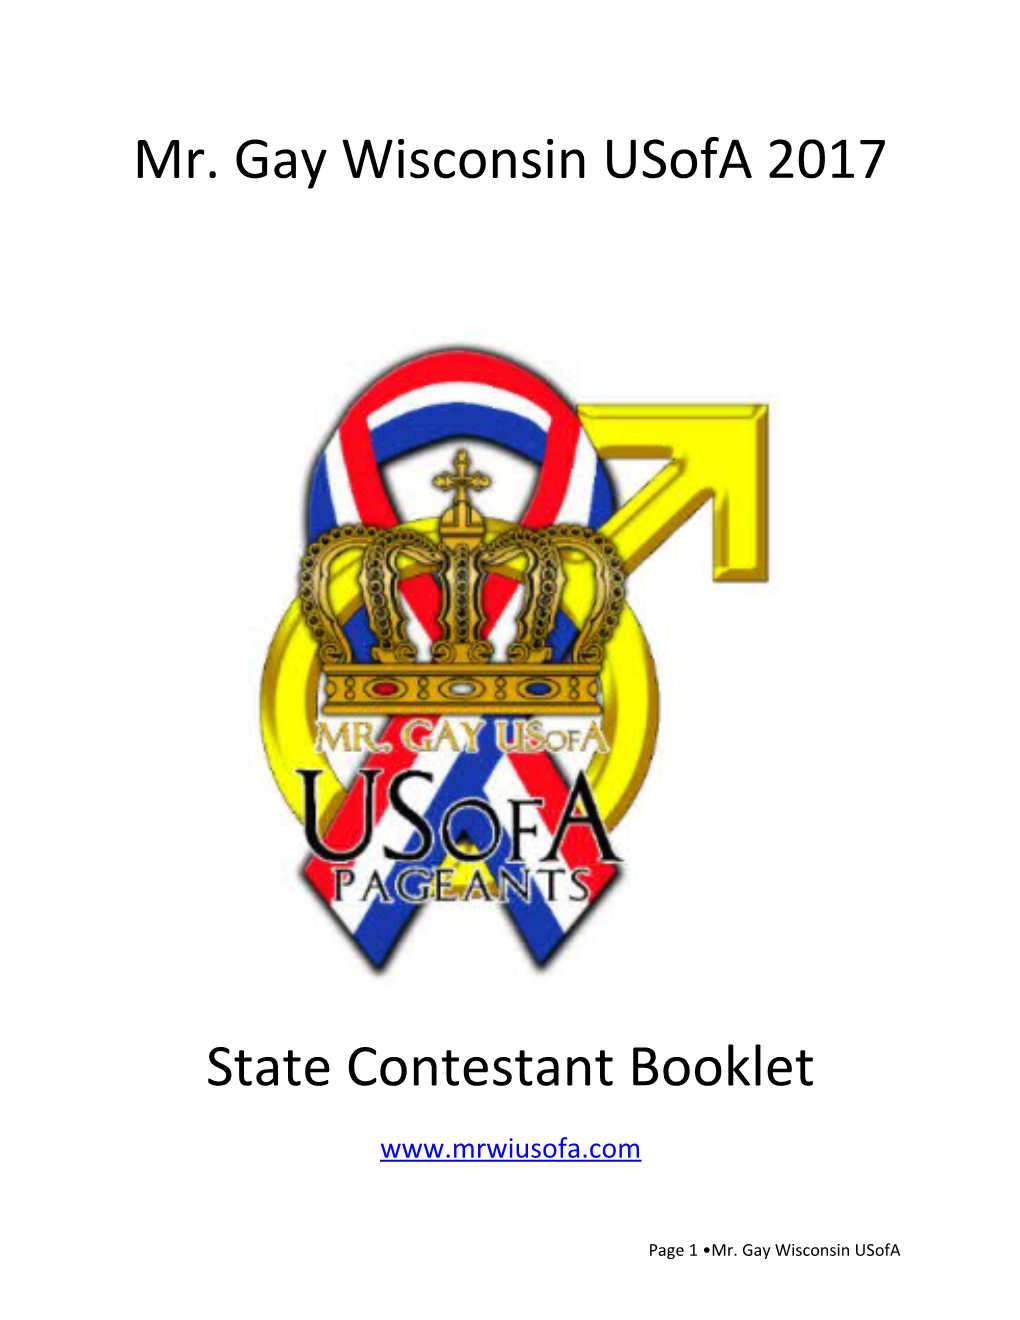 State Contestant Booklet